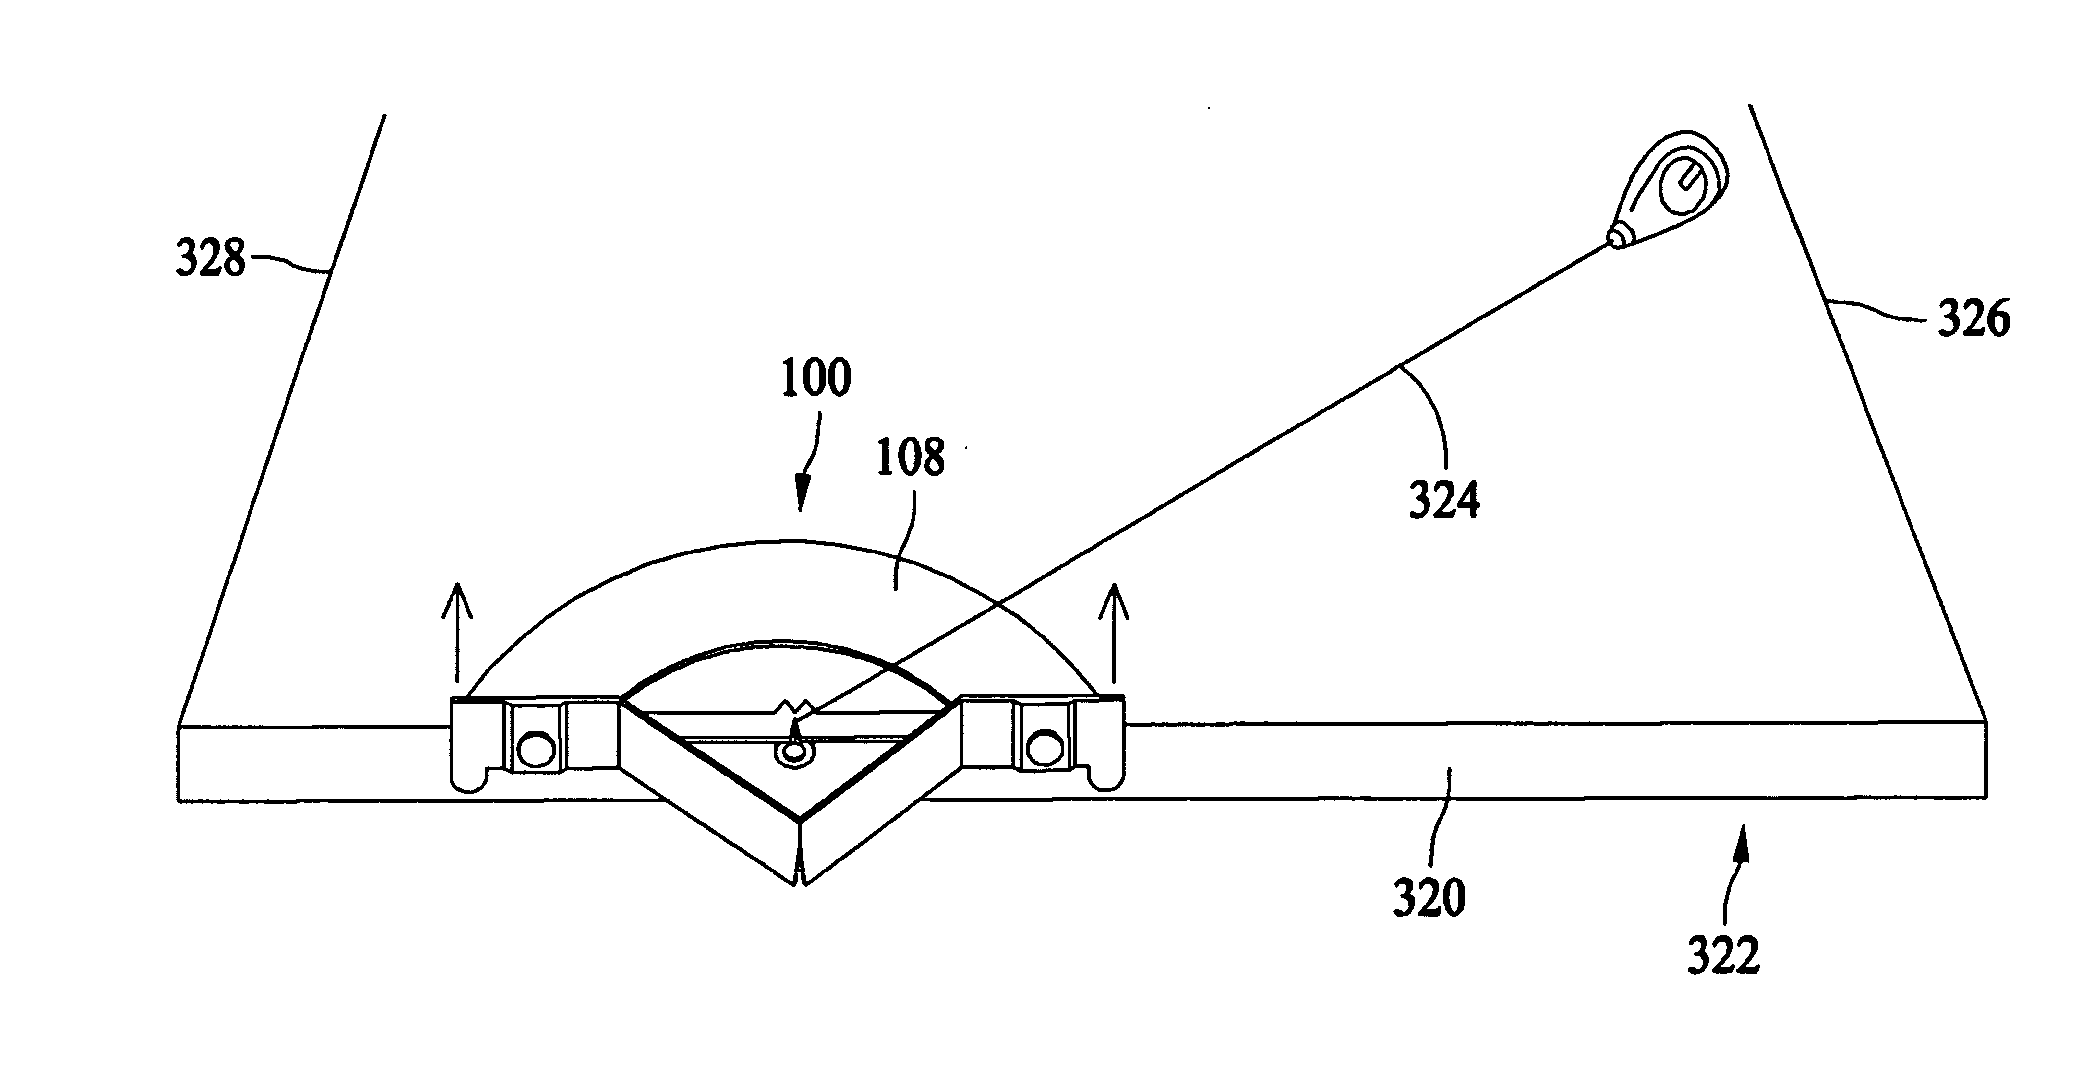 Construction layout and angle measurement tool